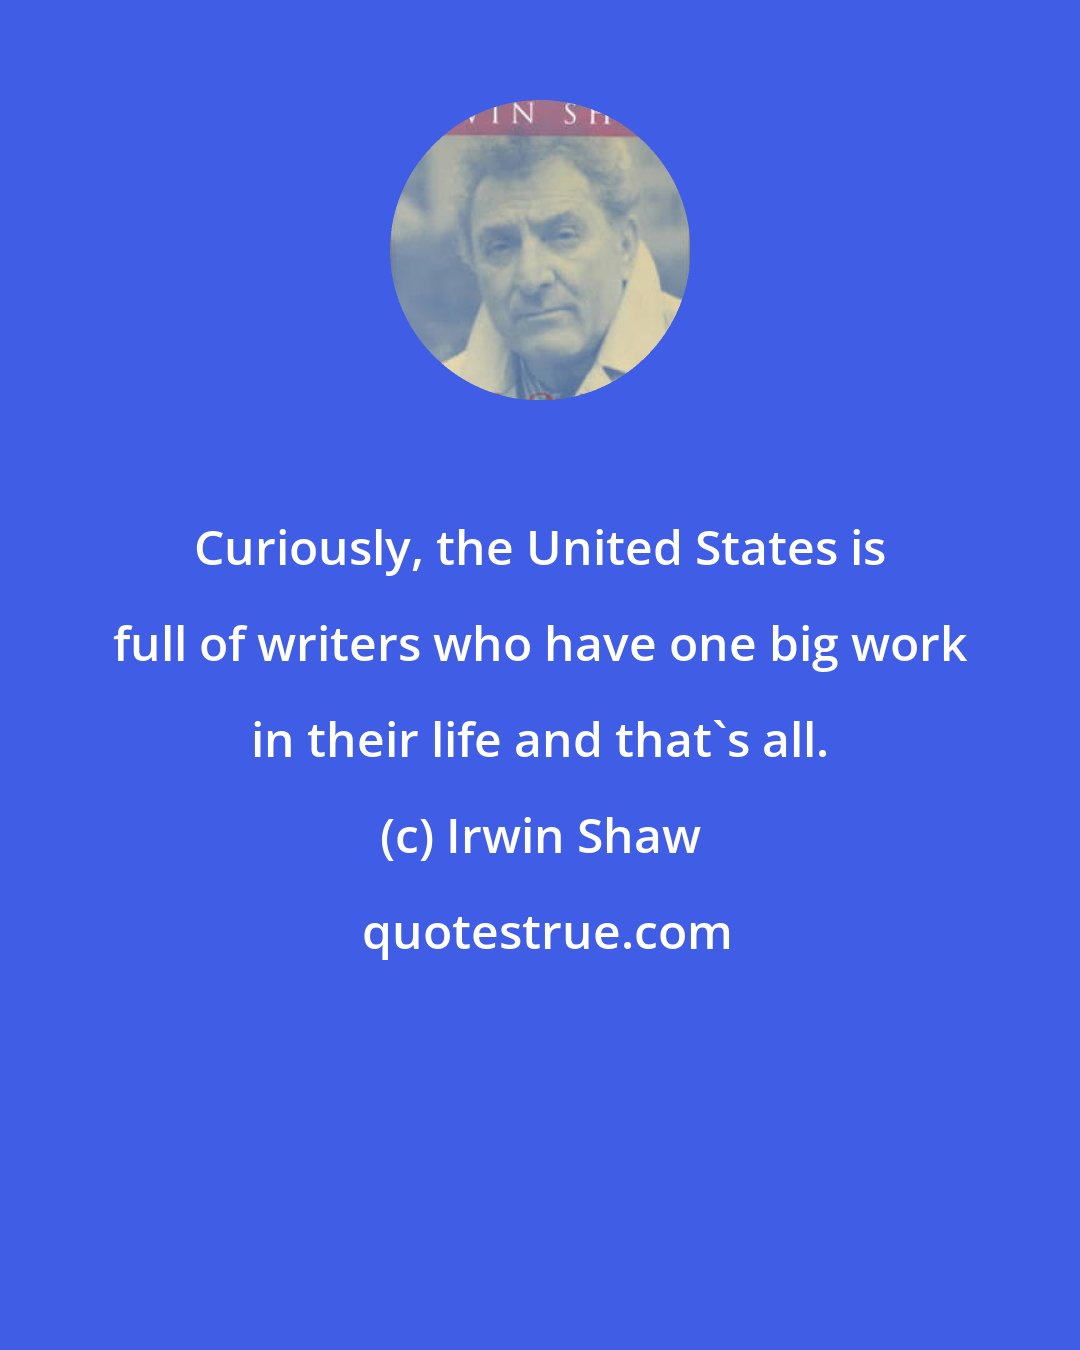 Irwin Shaw: Curiously, the United States is full of writers who have one big work in their life and that's all.